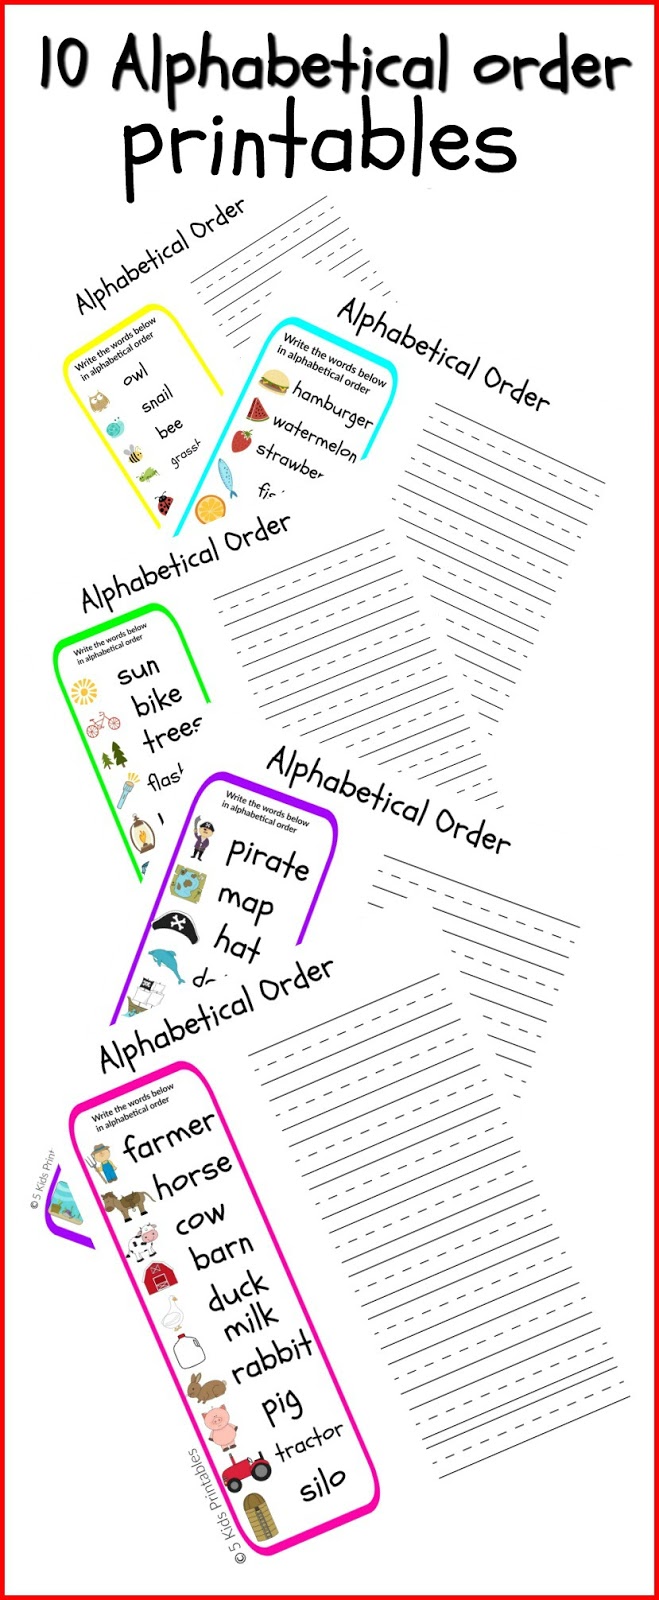 alphabetical-order-printables-homeschool-and-light-tables